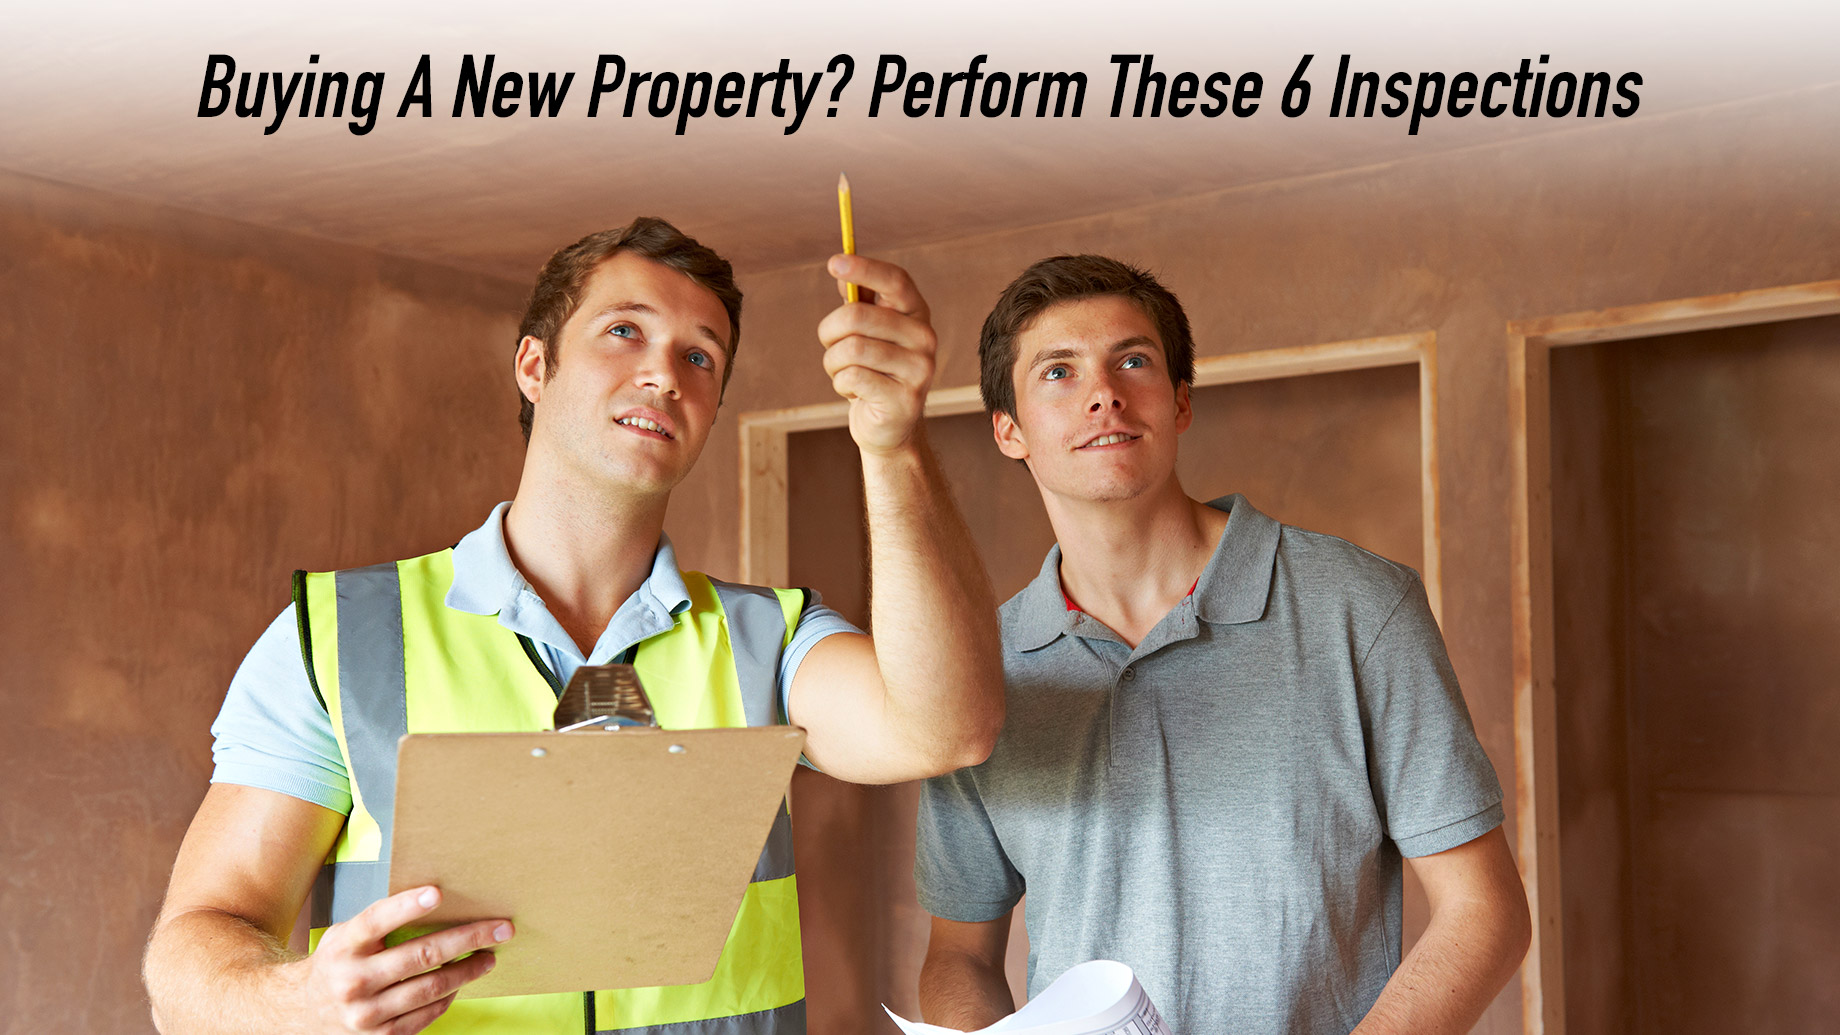 Buying A New Property? Perform These 6 Inspections